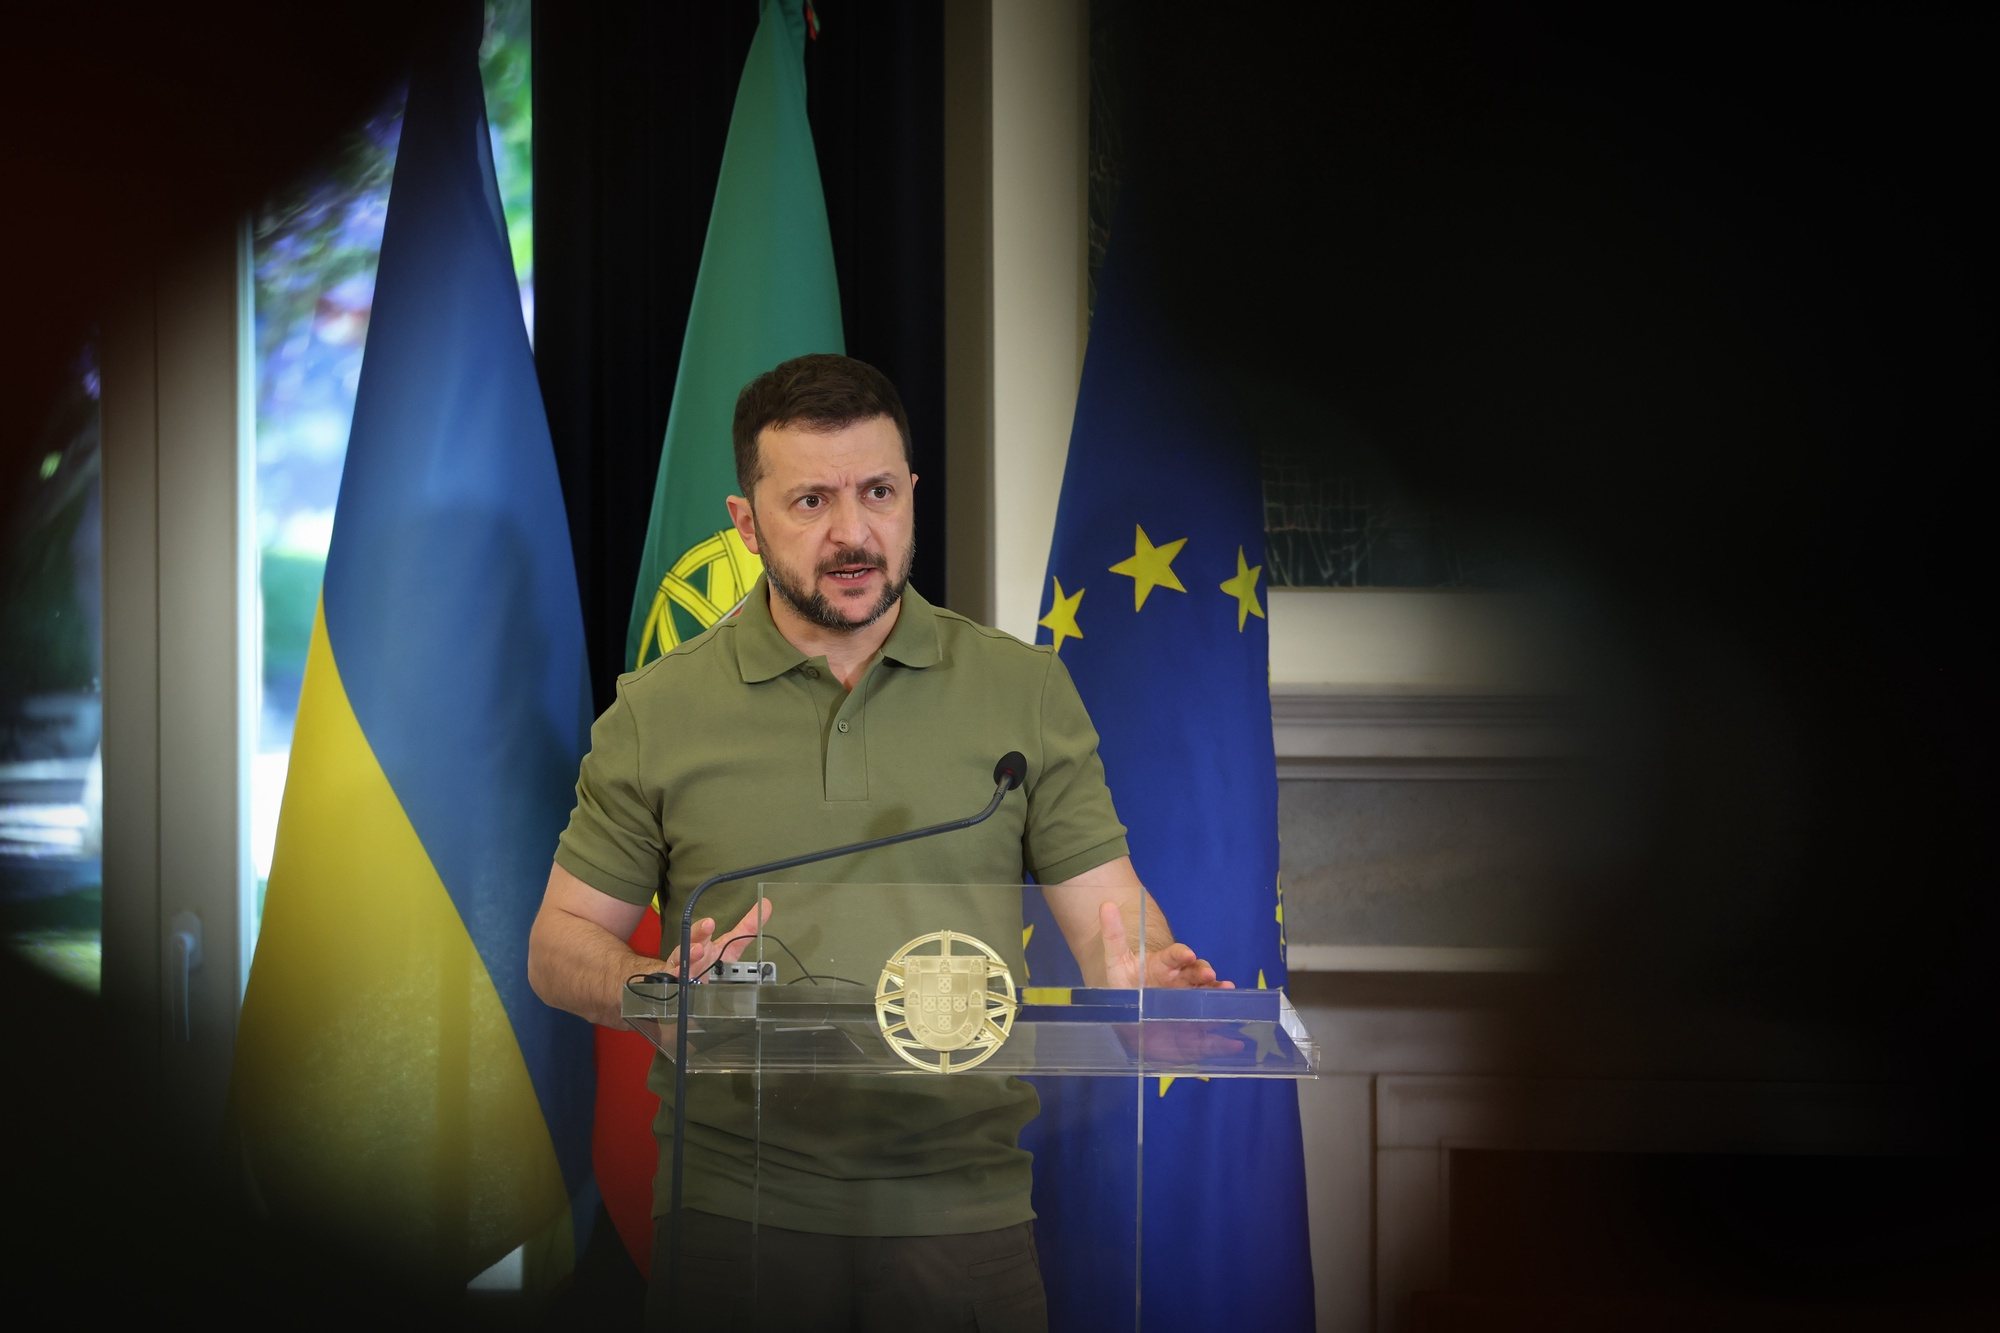 Ukraine&#039;s President Volodymyr Zelensky and portuguese prime minister Luis Montenegro (not pictured) during a joint statement, after a meeting at Sao Bento Palace in Lisbon, Portugal, 28 May 2024. According to this note, released simultaneously by the office of the prime minister, Luís Montenegro, &quot;President Zelensky&#039;s working visit is part of the shared intention to deepen the excellent relations between the two states, with a particular focus on strengthening cooperation in the field of security and defence&quot;. JOSE SENA GOULAO/LUSA/POOL